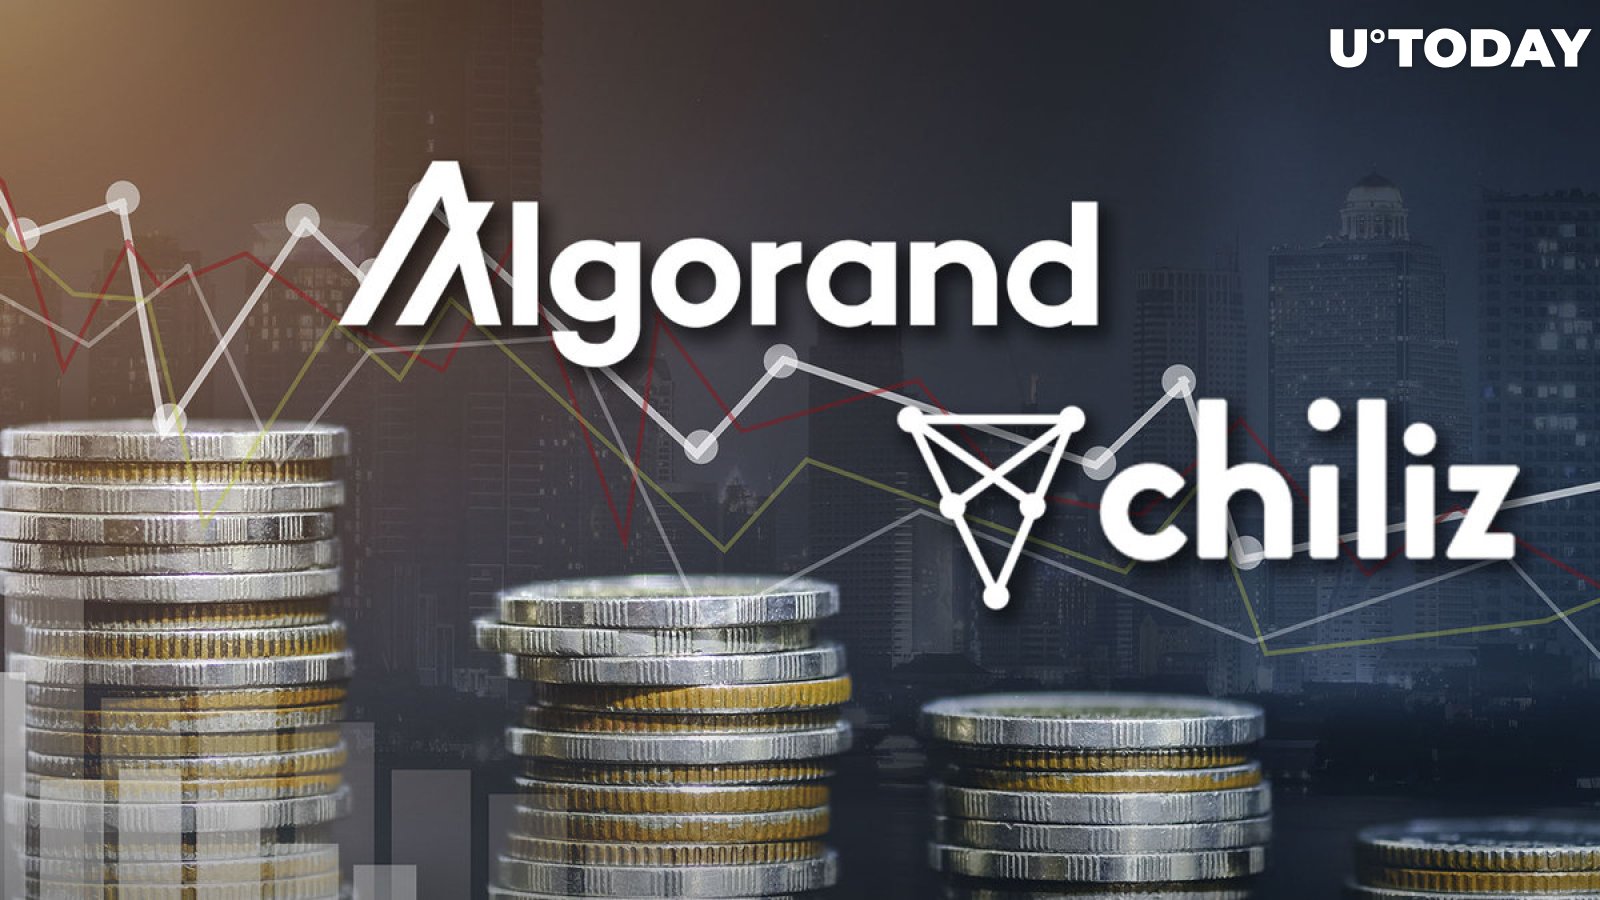 Here's Why Chiliz and Algorand Suffered Losses in Latest Market Drop: Details